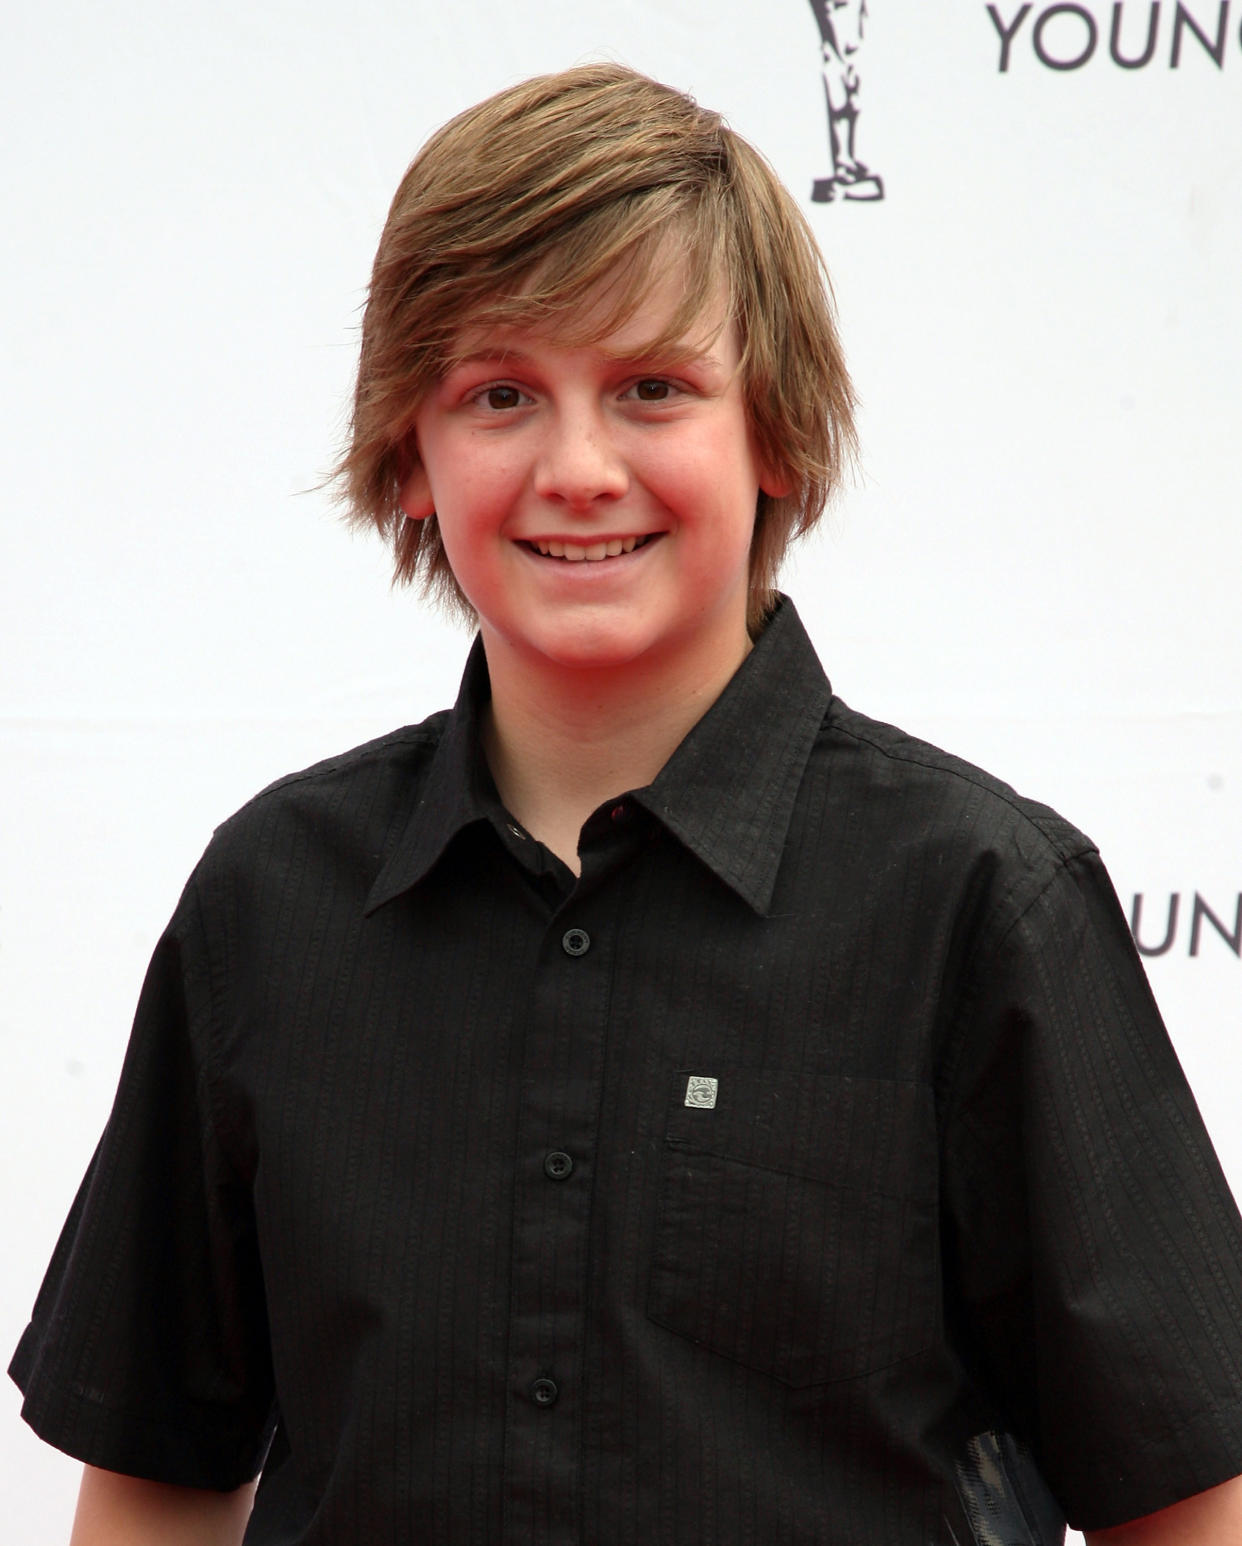 Actor Austin Majors at the 30th Annual Young Artist Awards at the Globe Theatre on March 29, 2009 in Los Angeles, California.